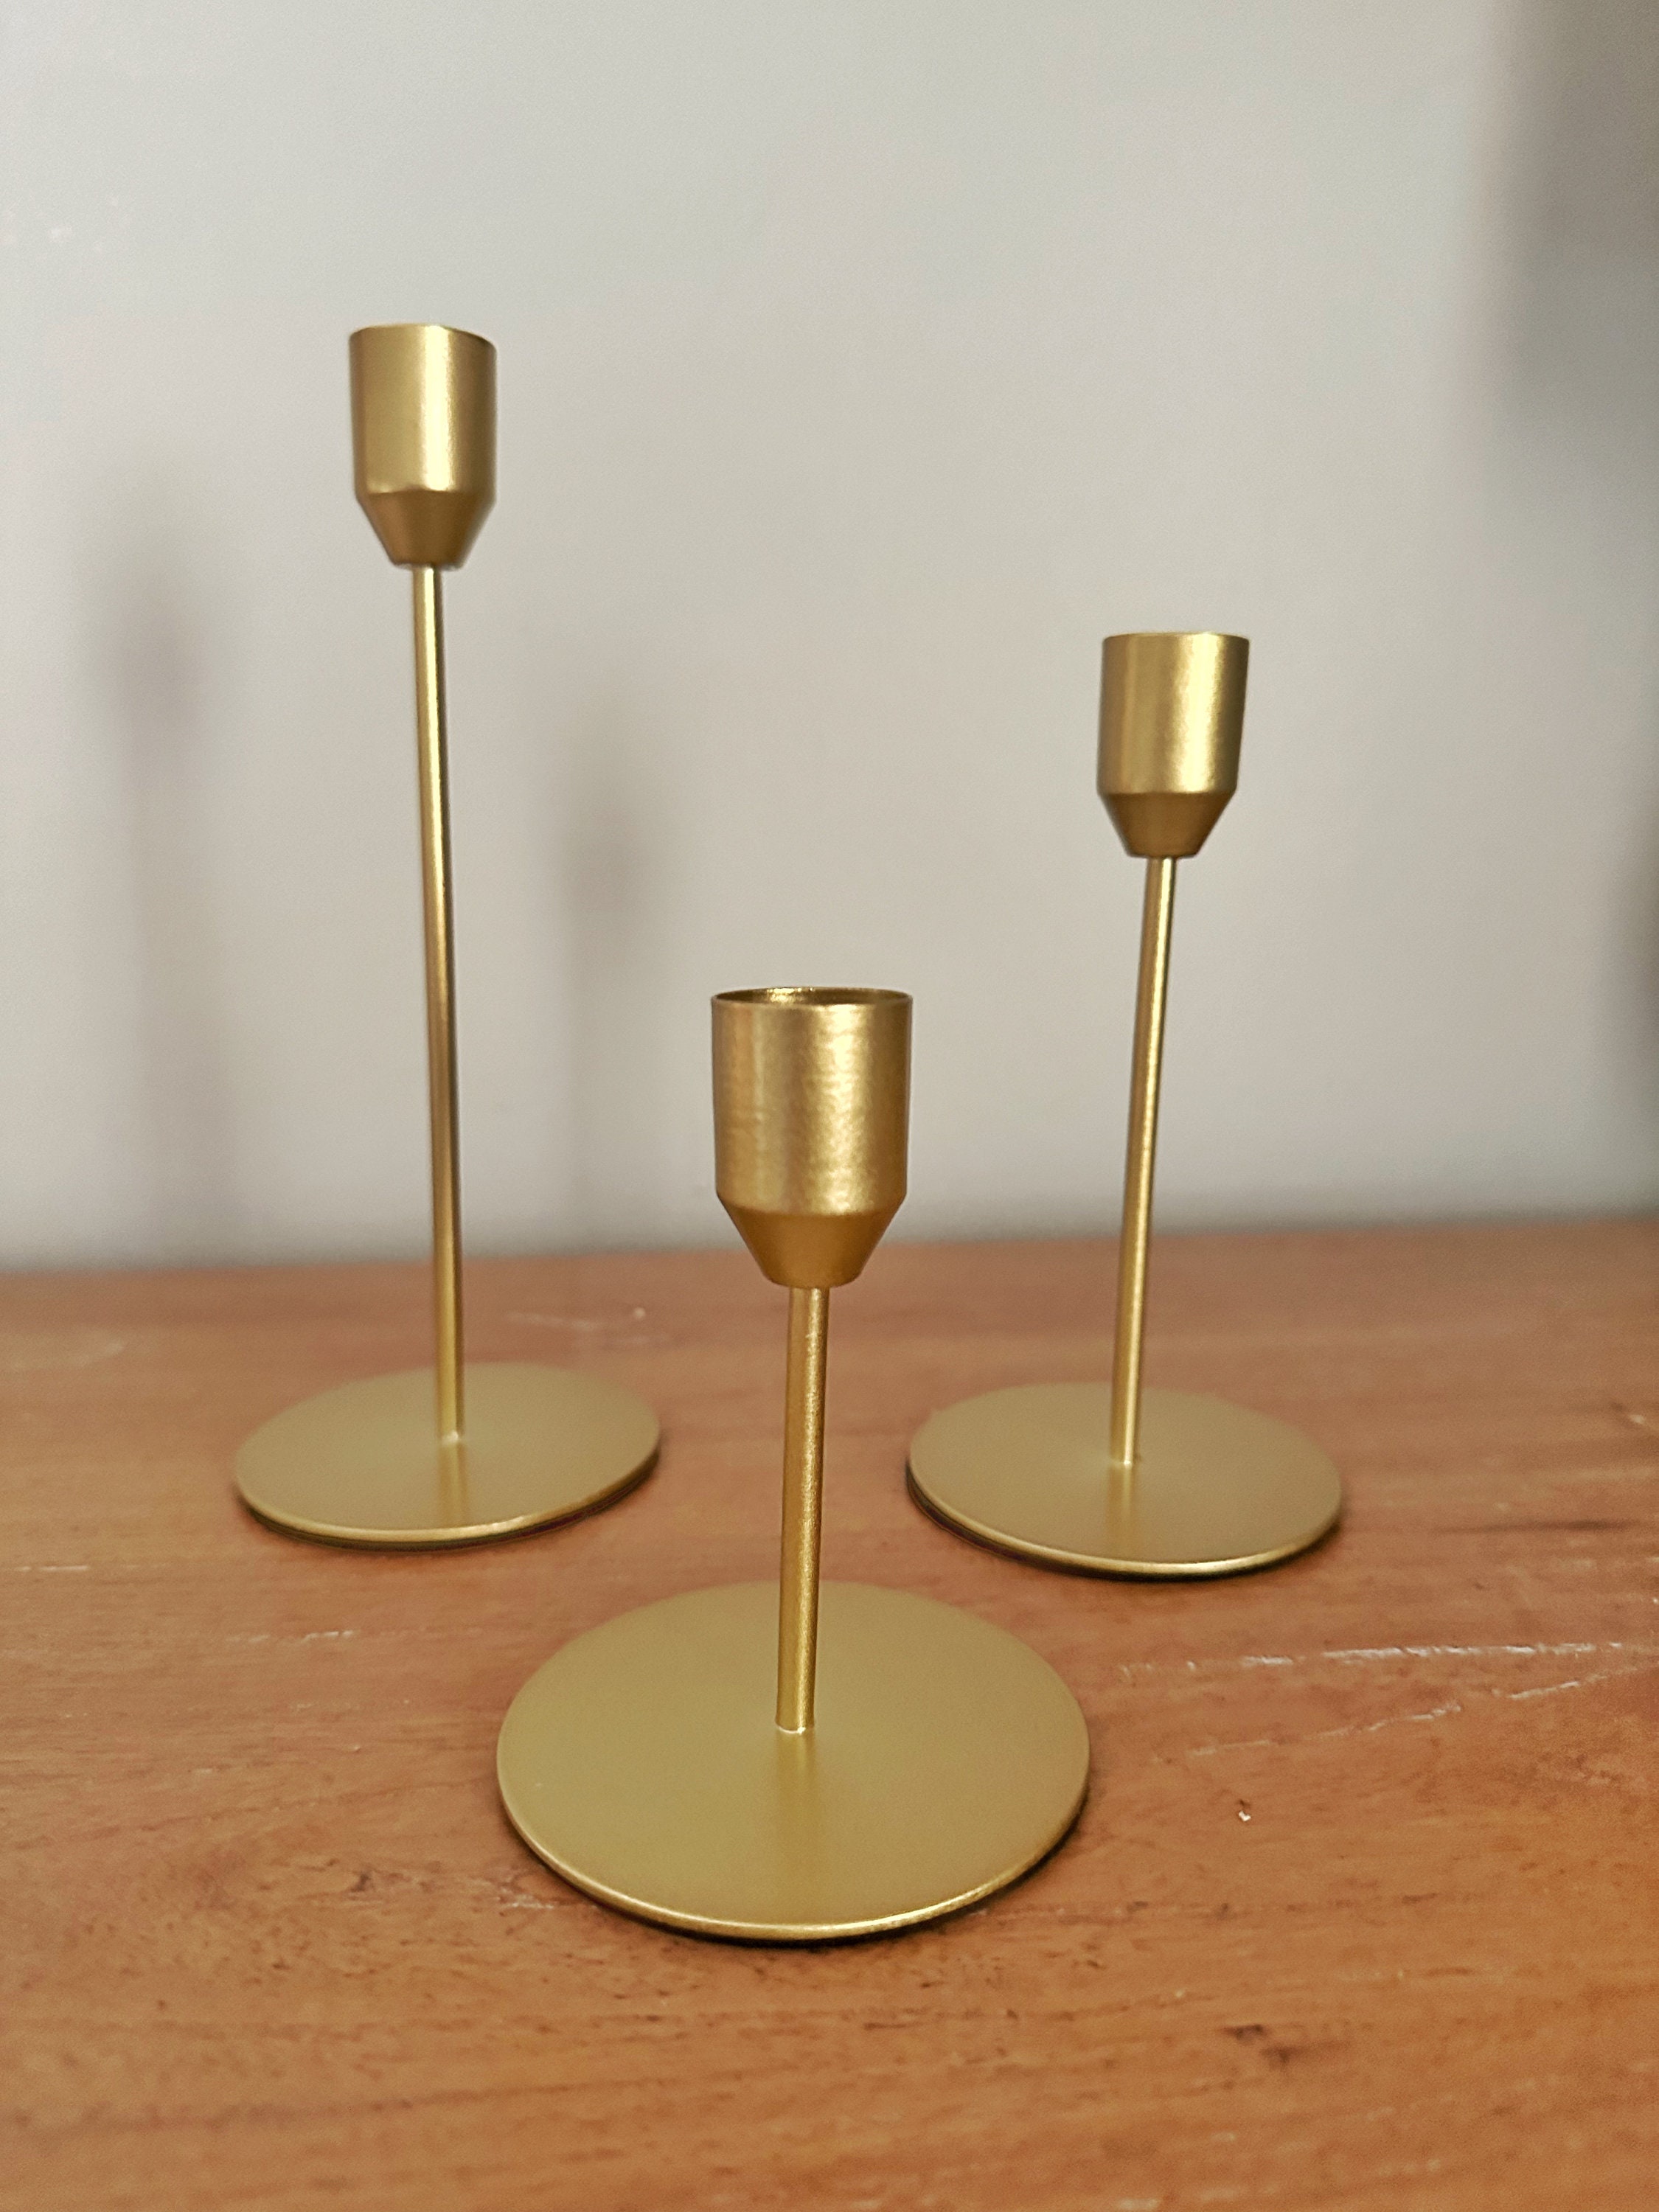 Black and Gold Candle Holders, Modern Ceramic Candlesticks, Dripping Gold  Candleholders, Halloween Decor 